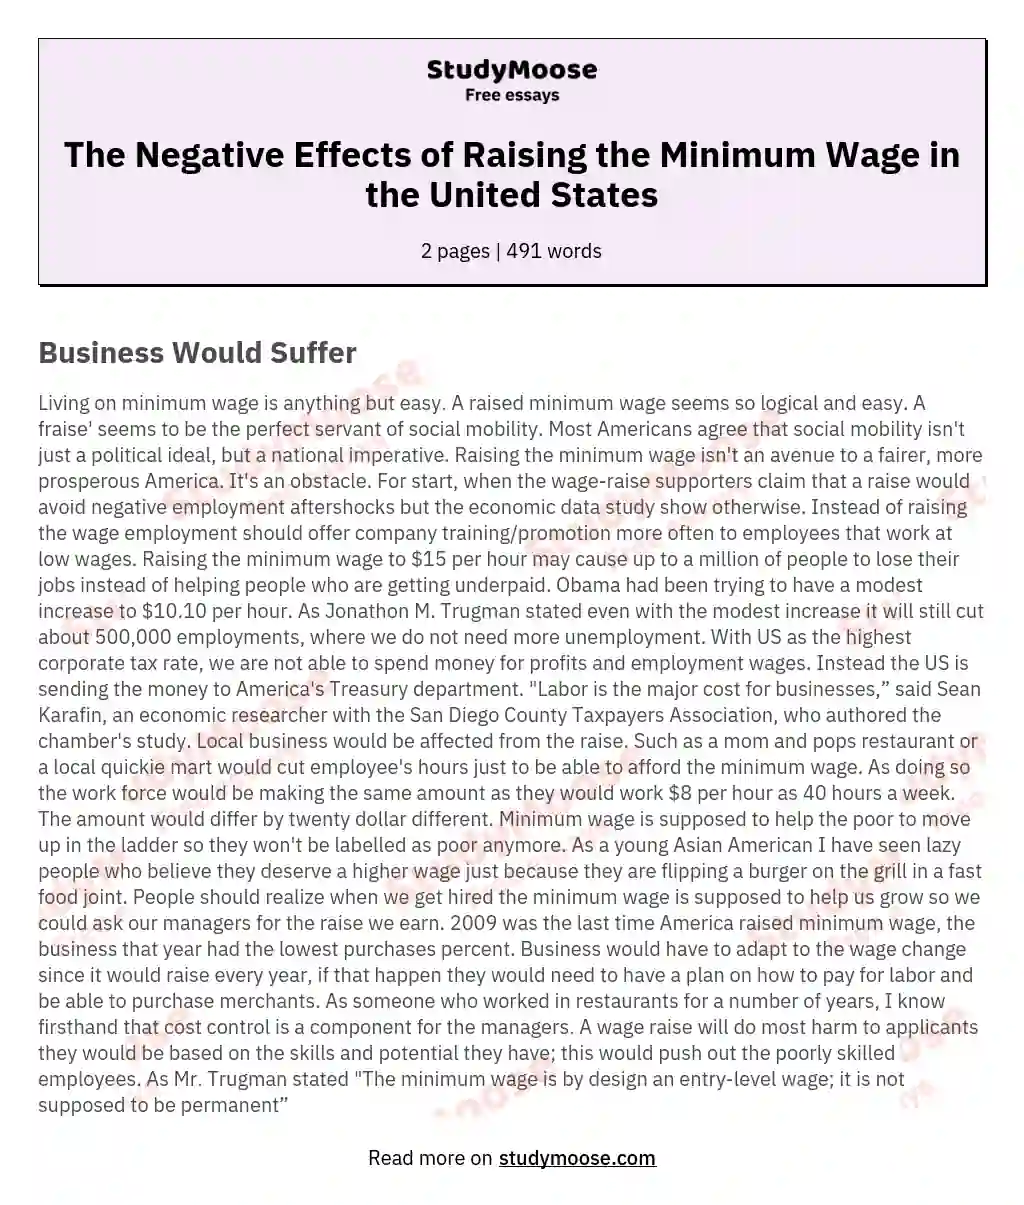 The Negative Effects of Raising the Minimum Wage in the United States